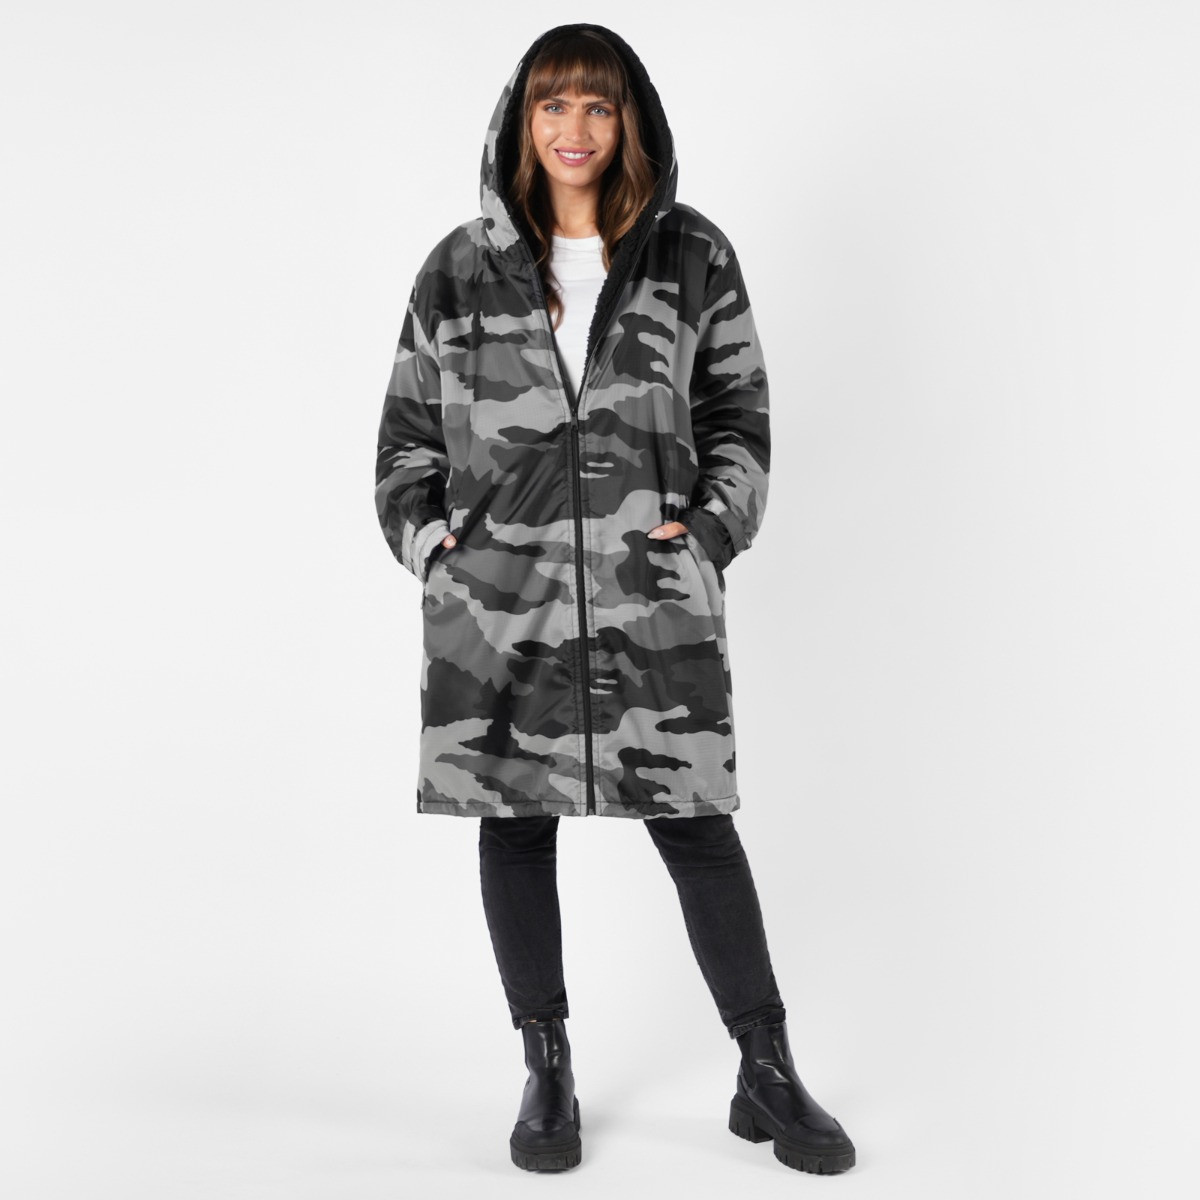 OHS Water Resistant Camo Print Full Zip Changing Robe - Charcoal>